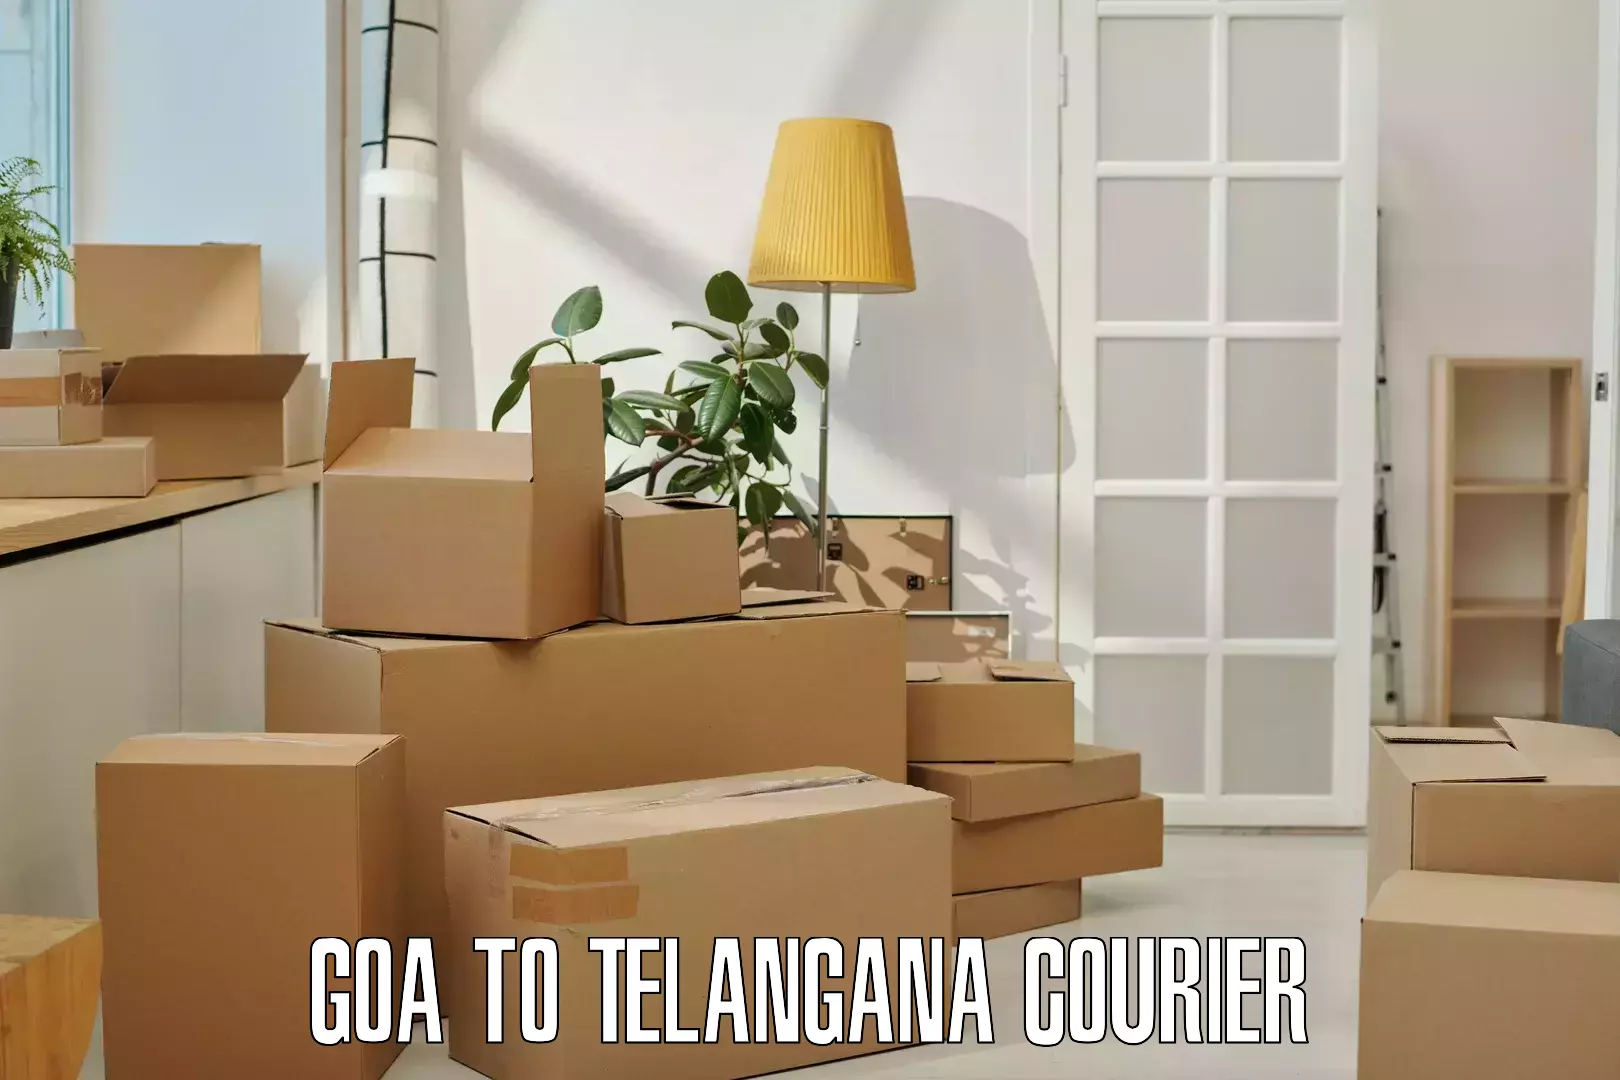 Courier service innovation in Goa to Vikarabad